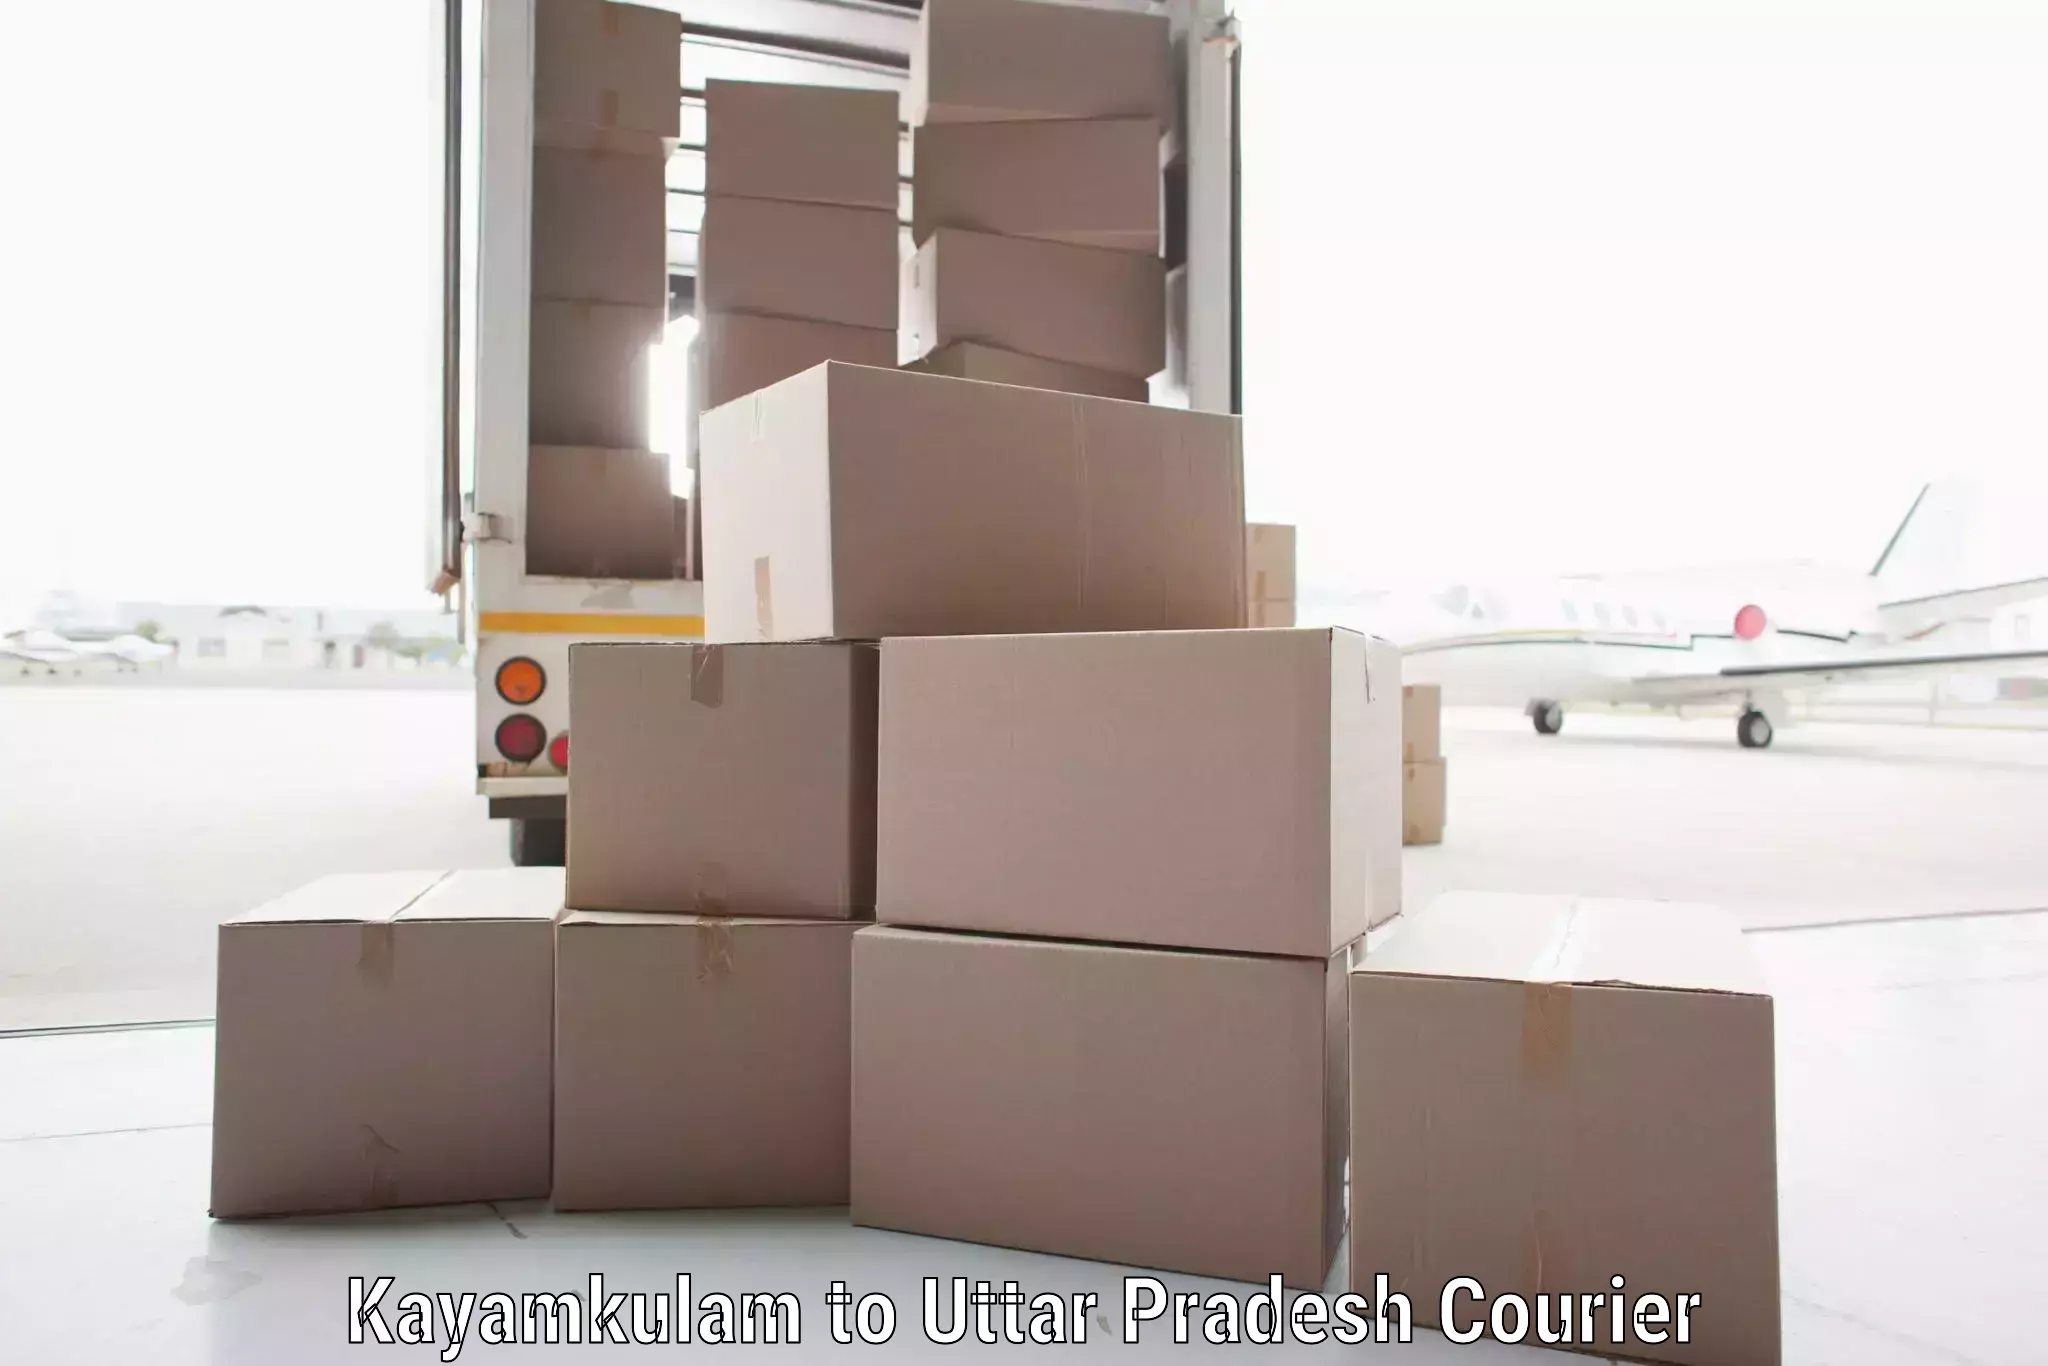 Efficient courier operations in Kayamkulam to Gopiganj